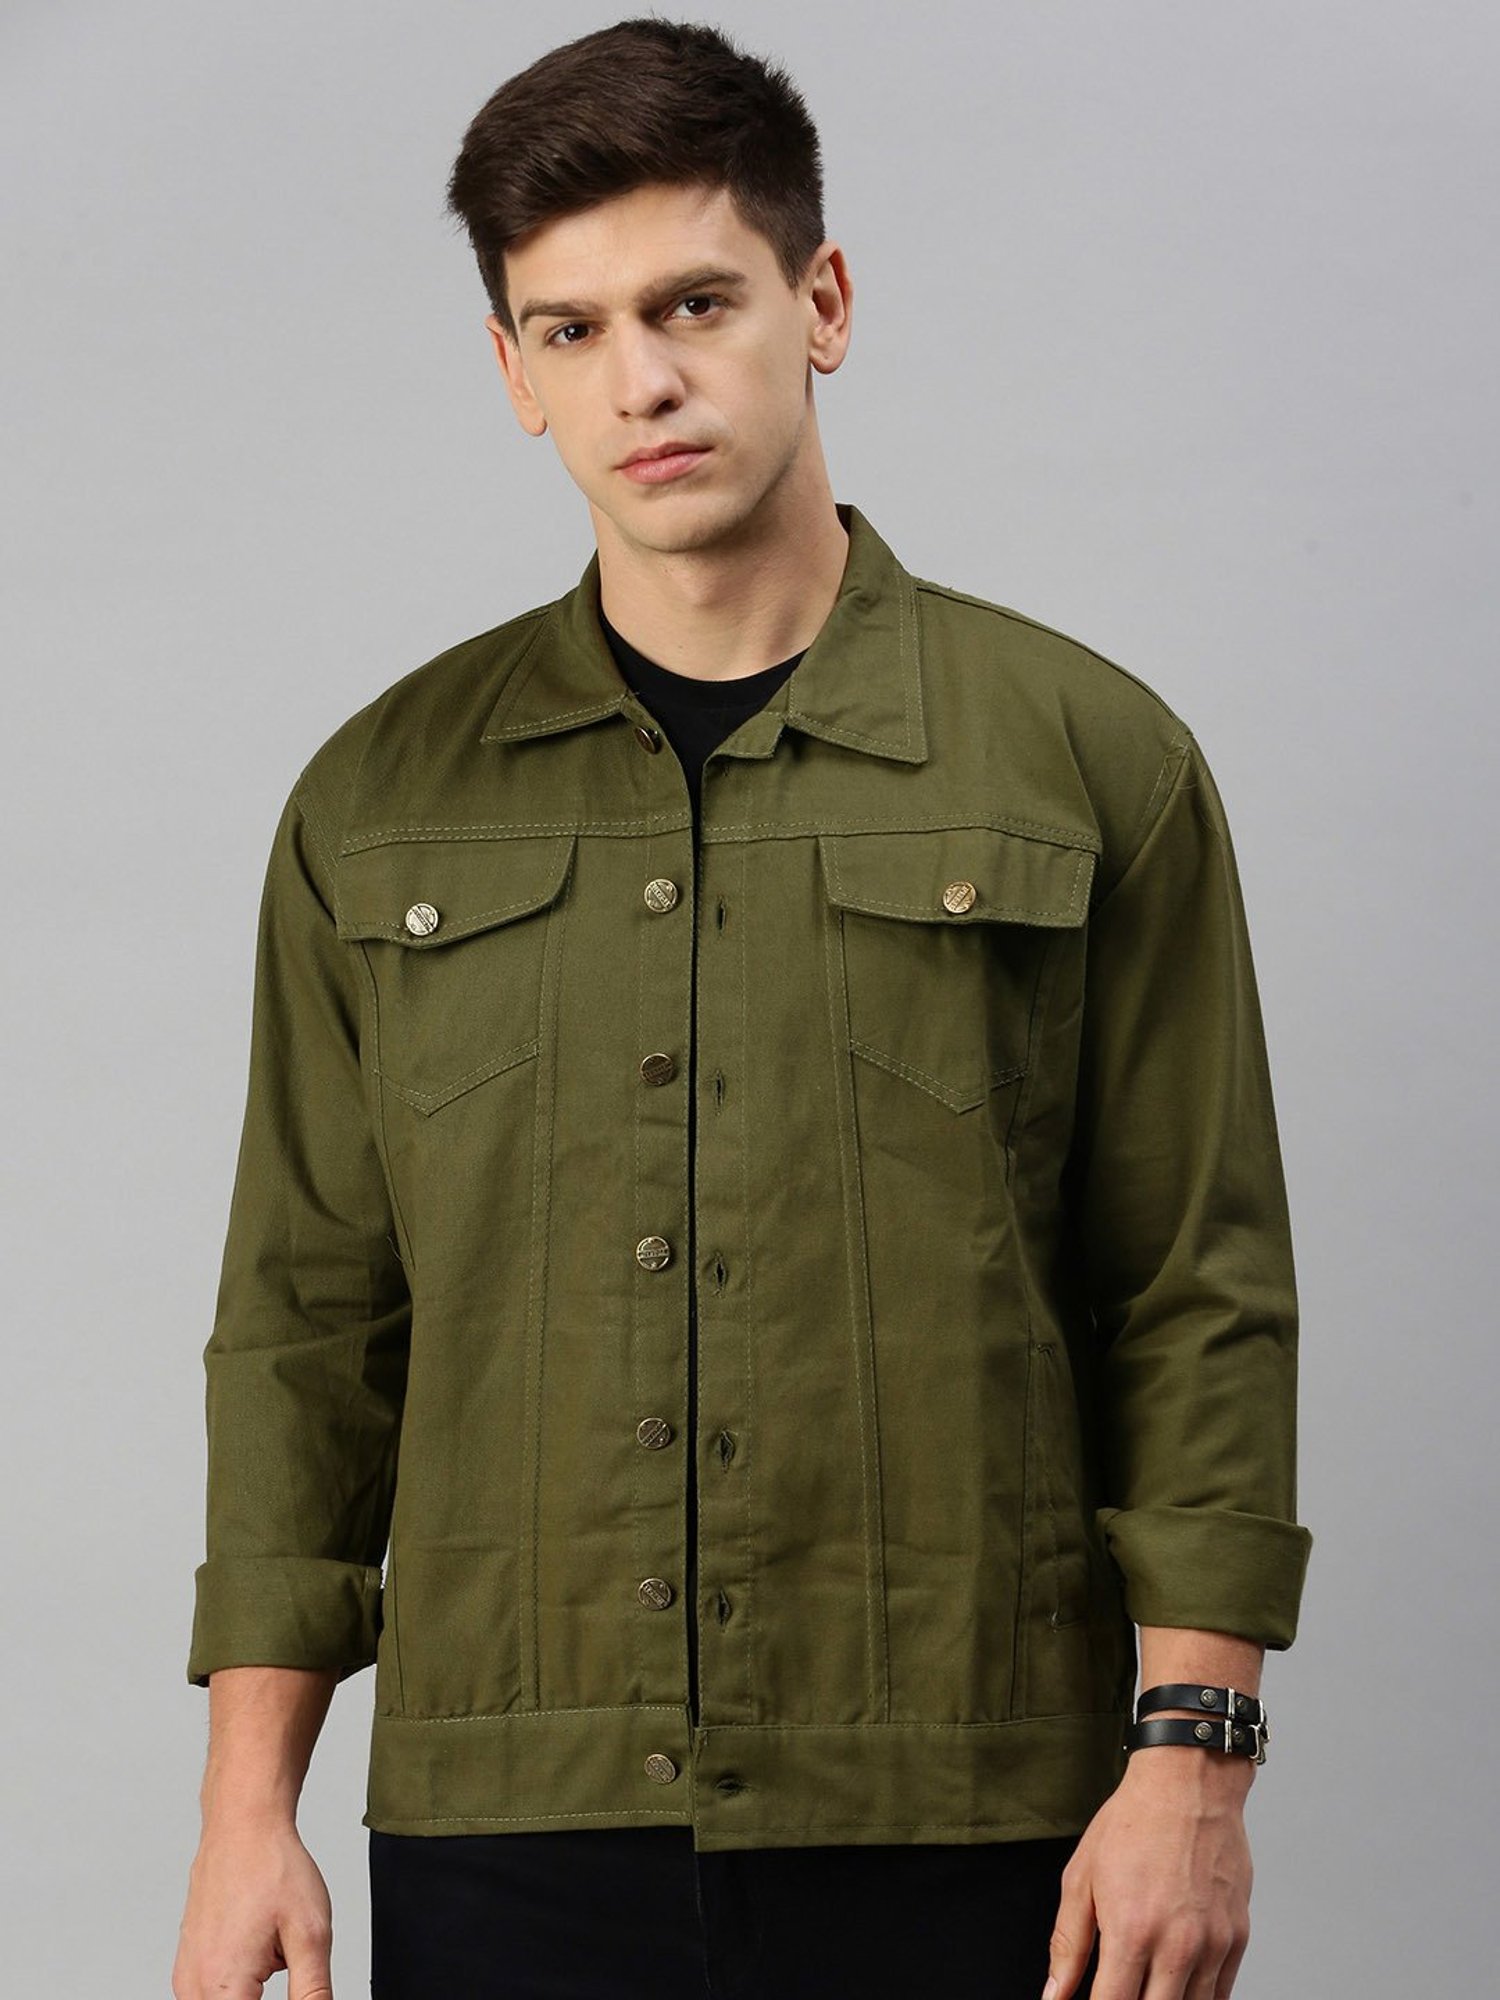 ASOS | Online shopping for the Latest Clothes & Fashion #olive #green #denim  #jacket #outfit #men #olivegreendenimjacketoutfitmen 68 / River Island Denim  Jacket…